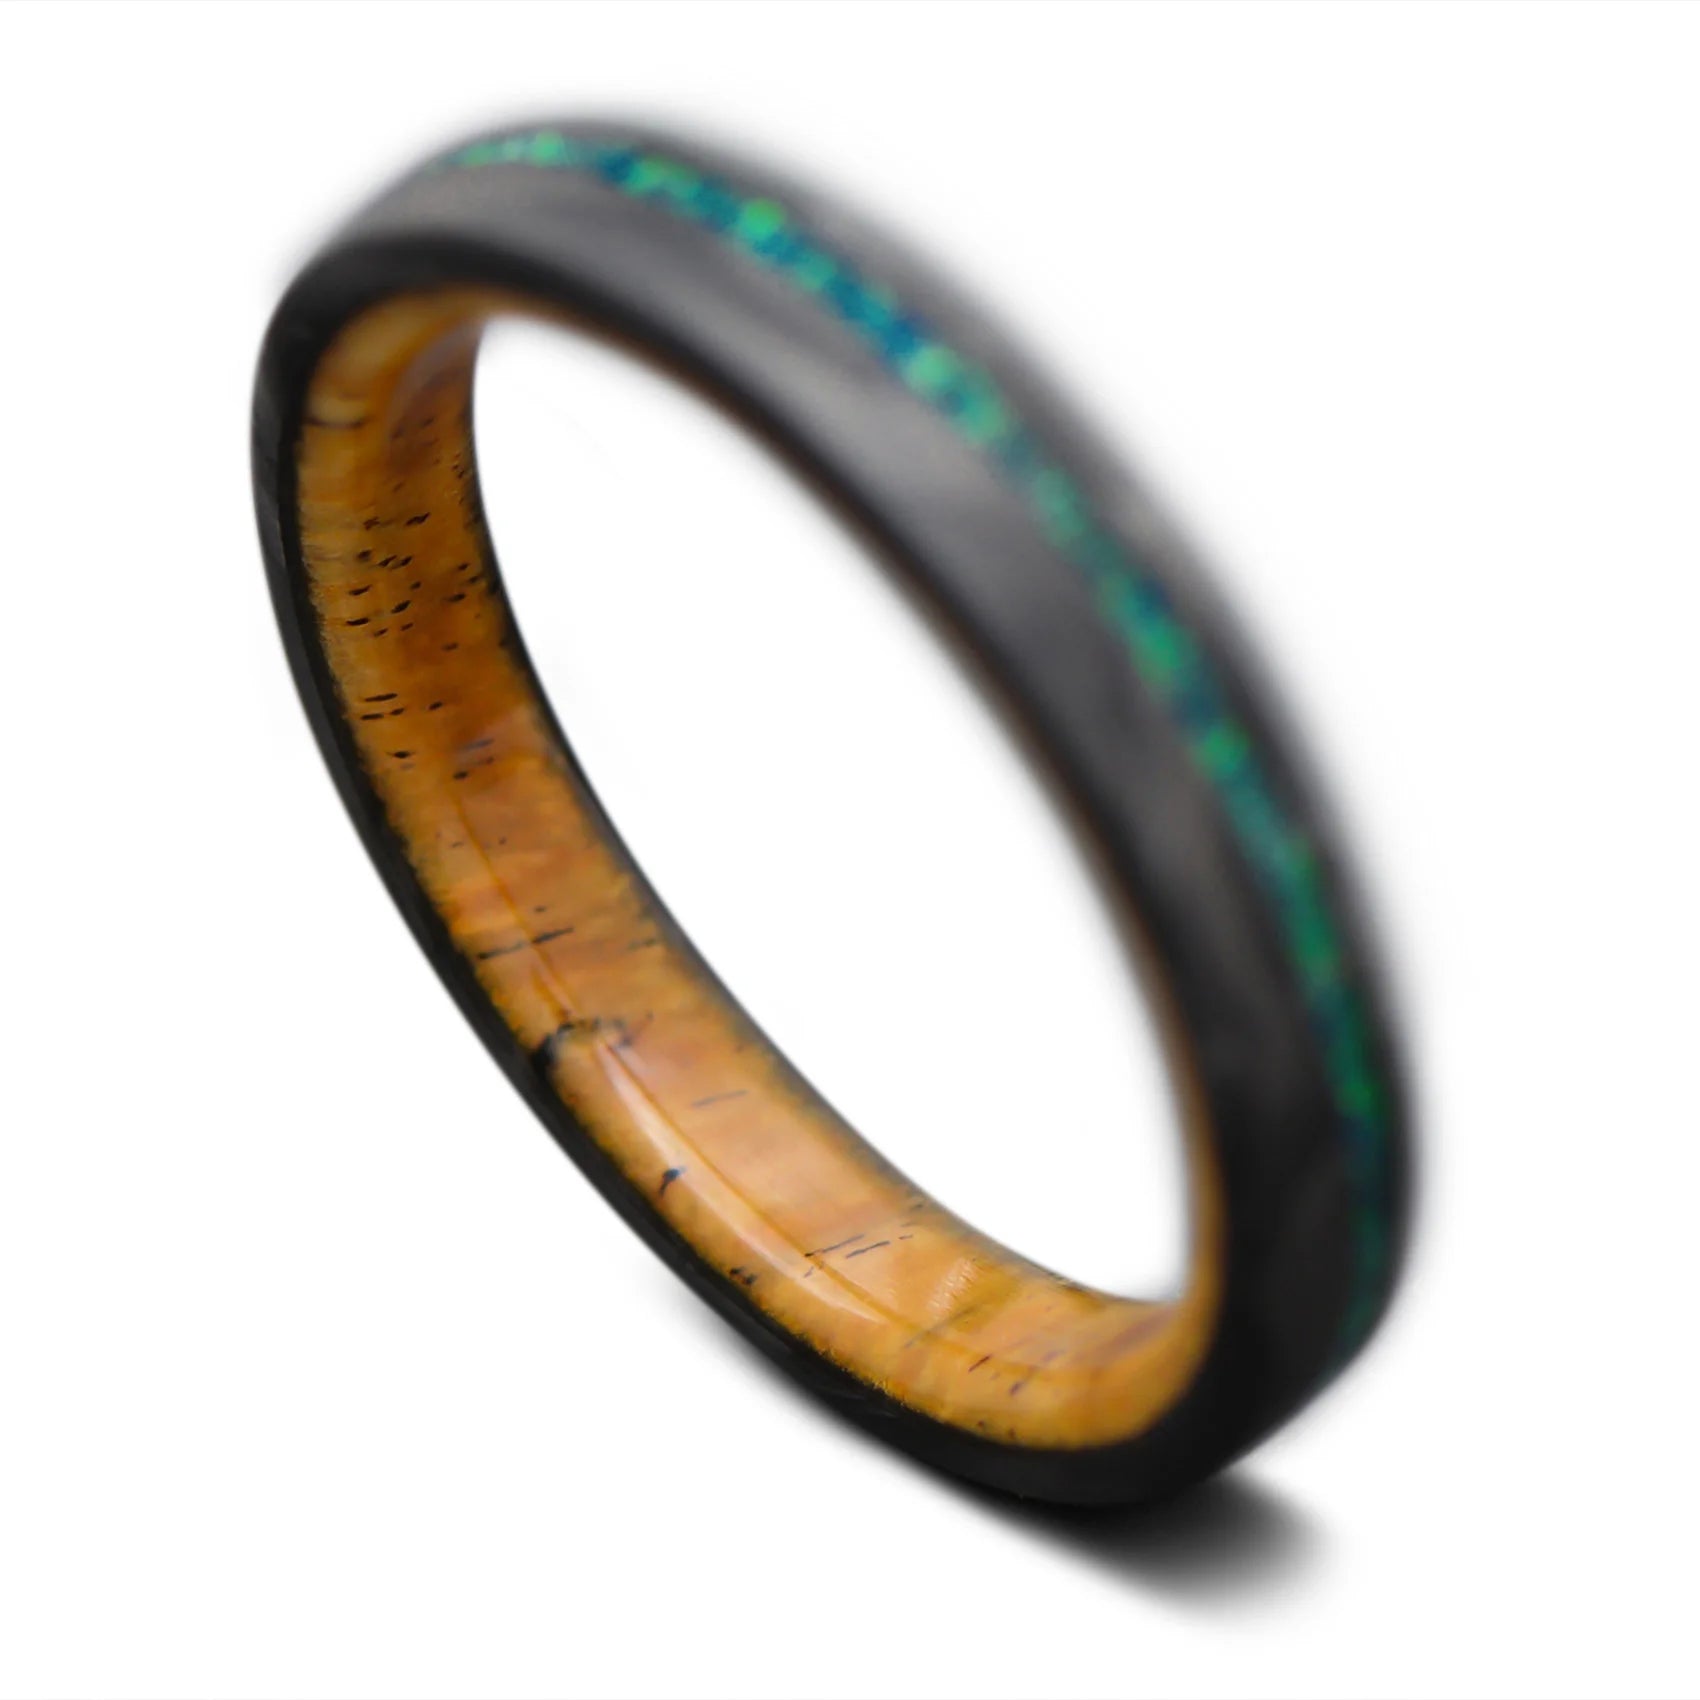 Forged carbon fiber ring with wood inner sleeve